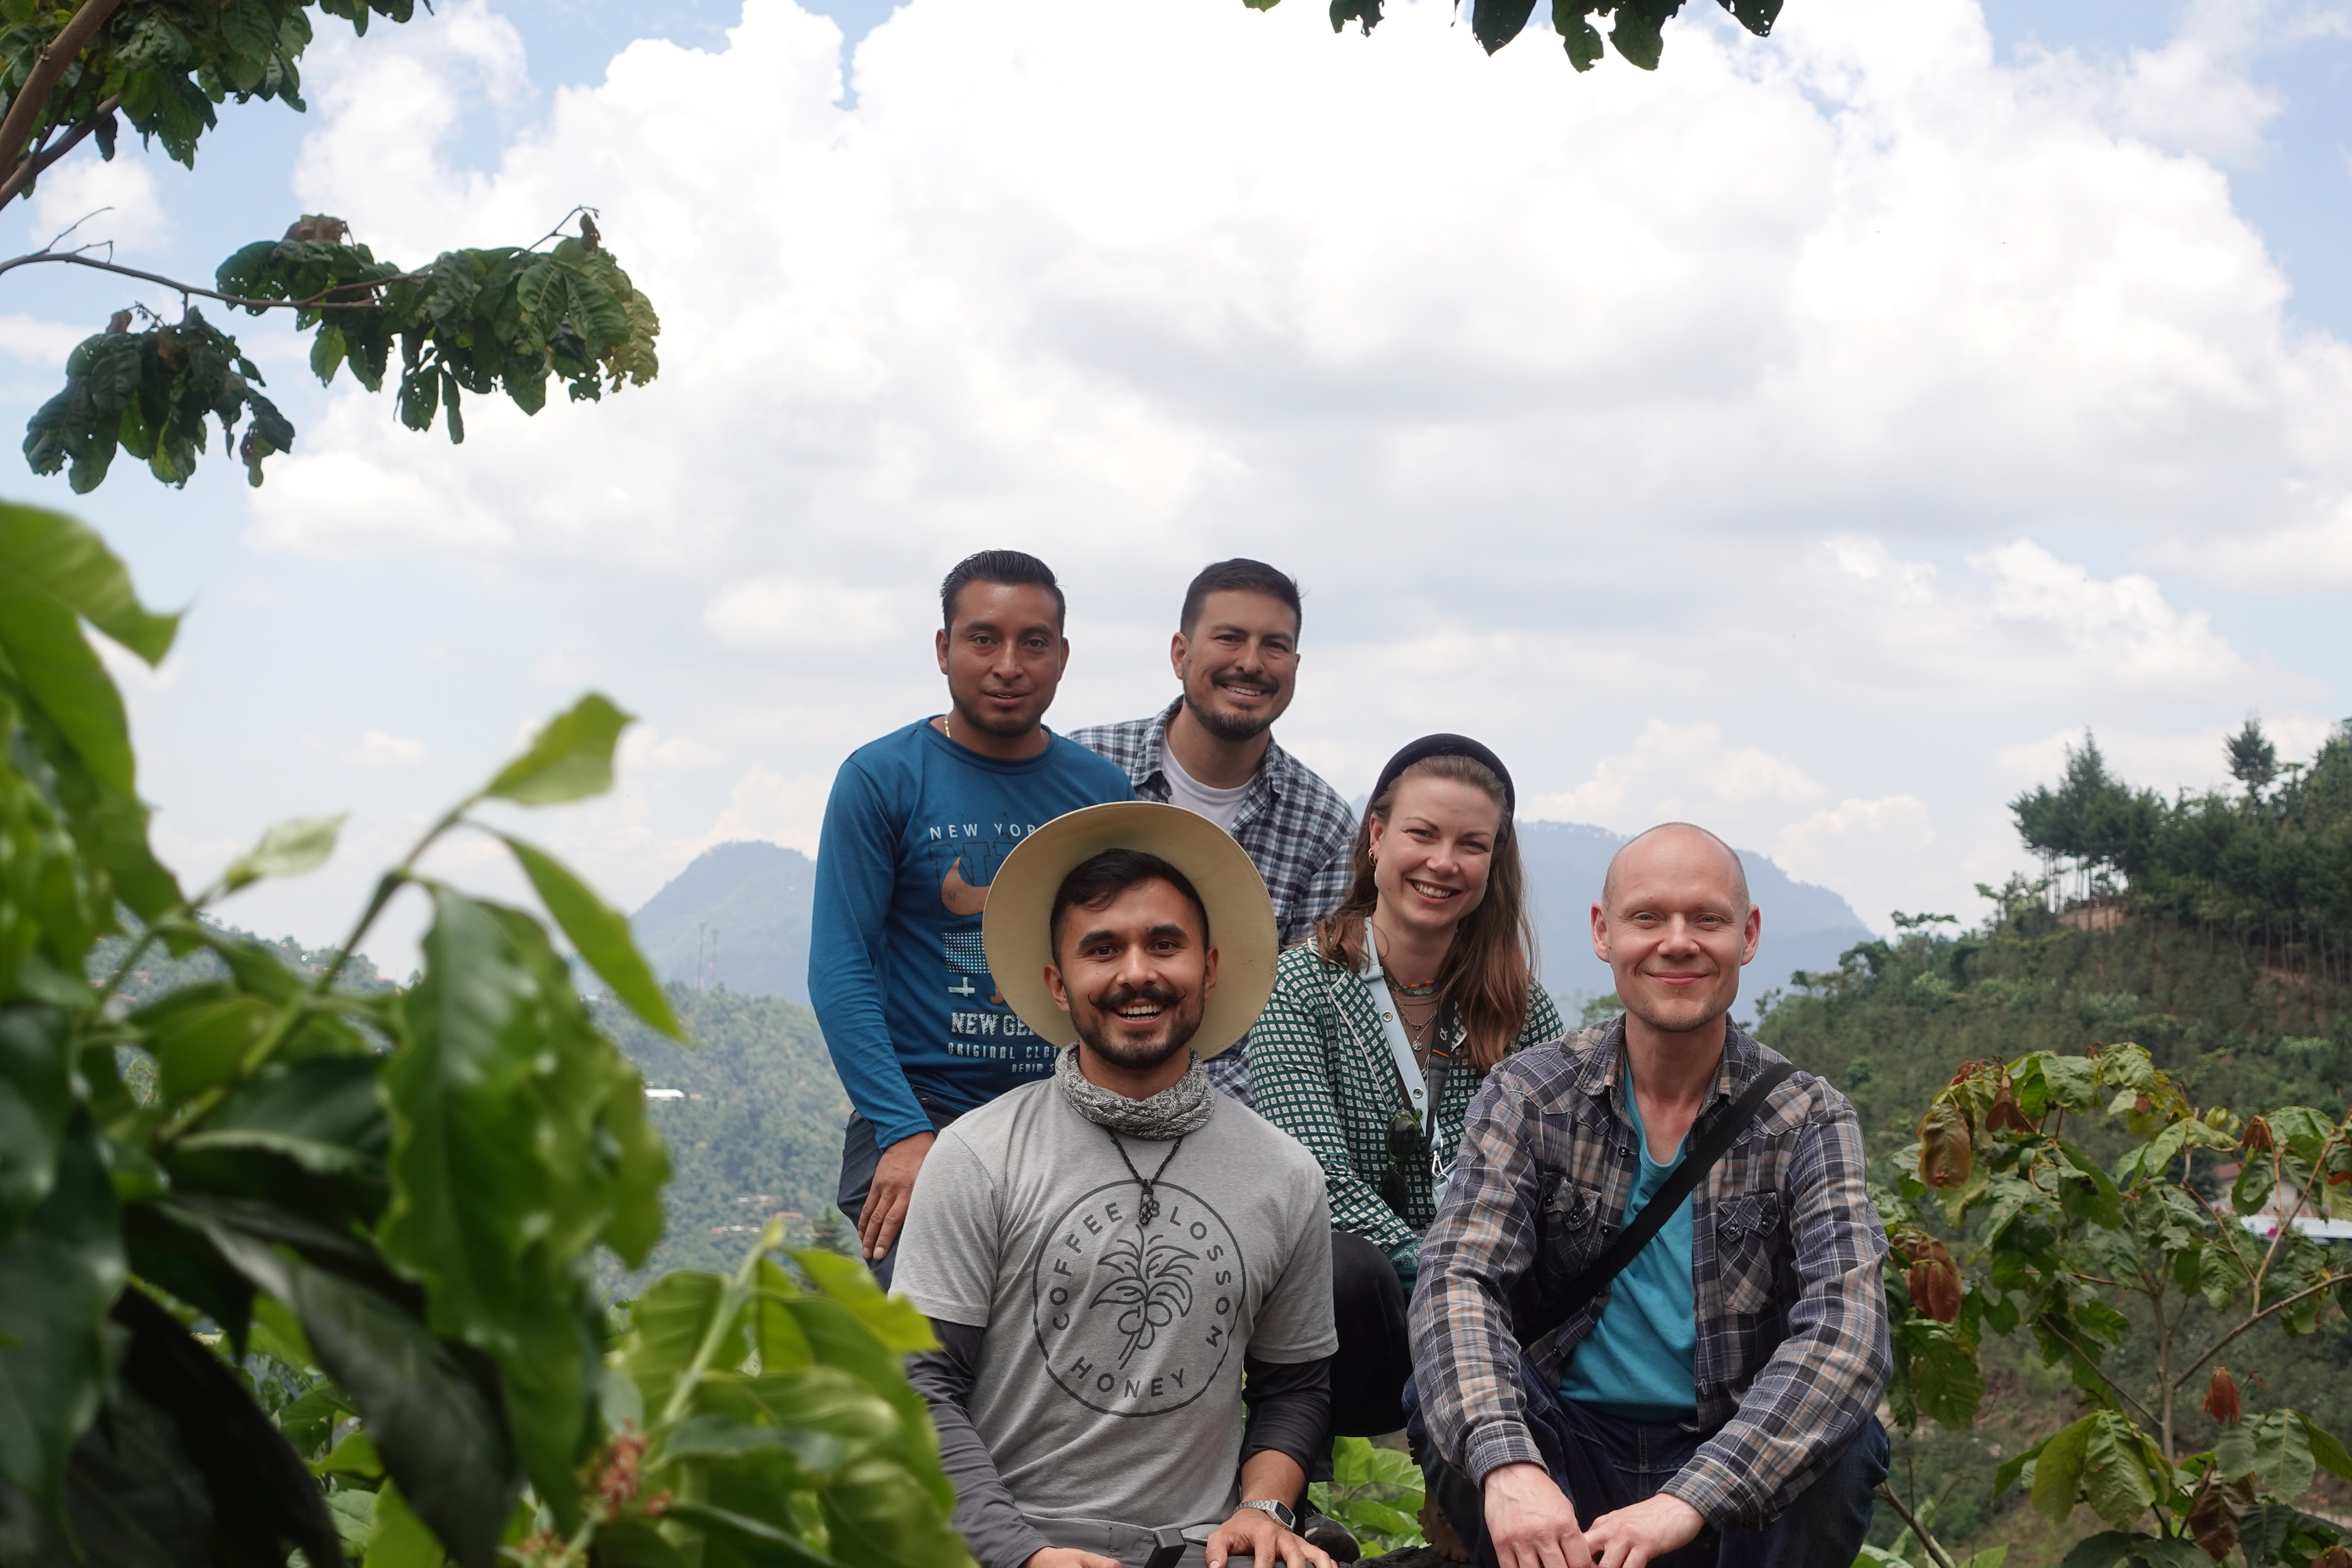 Our annual visit to the wonderful team at Finca Vista Hermosa